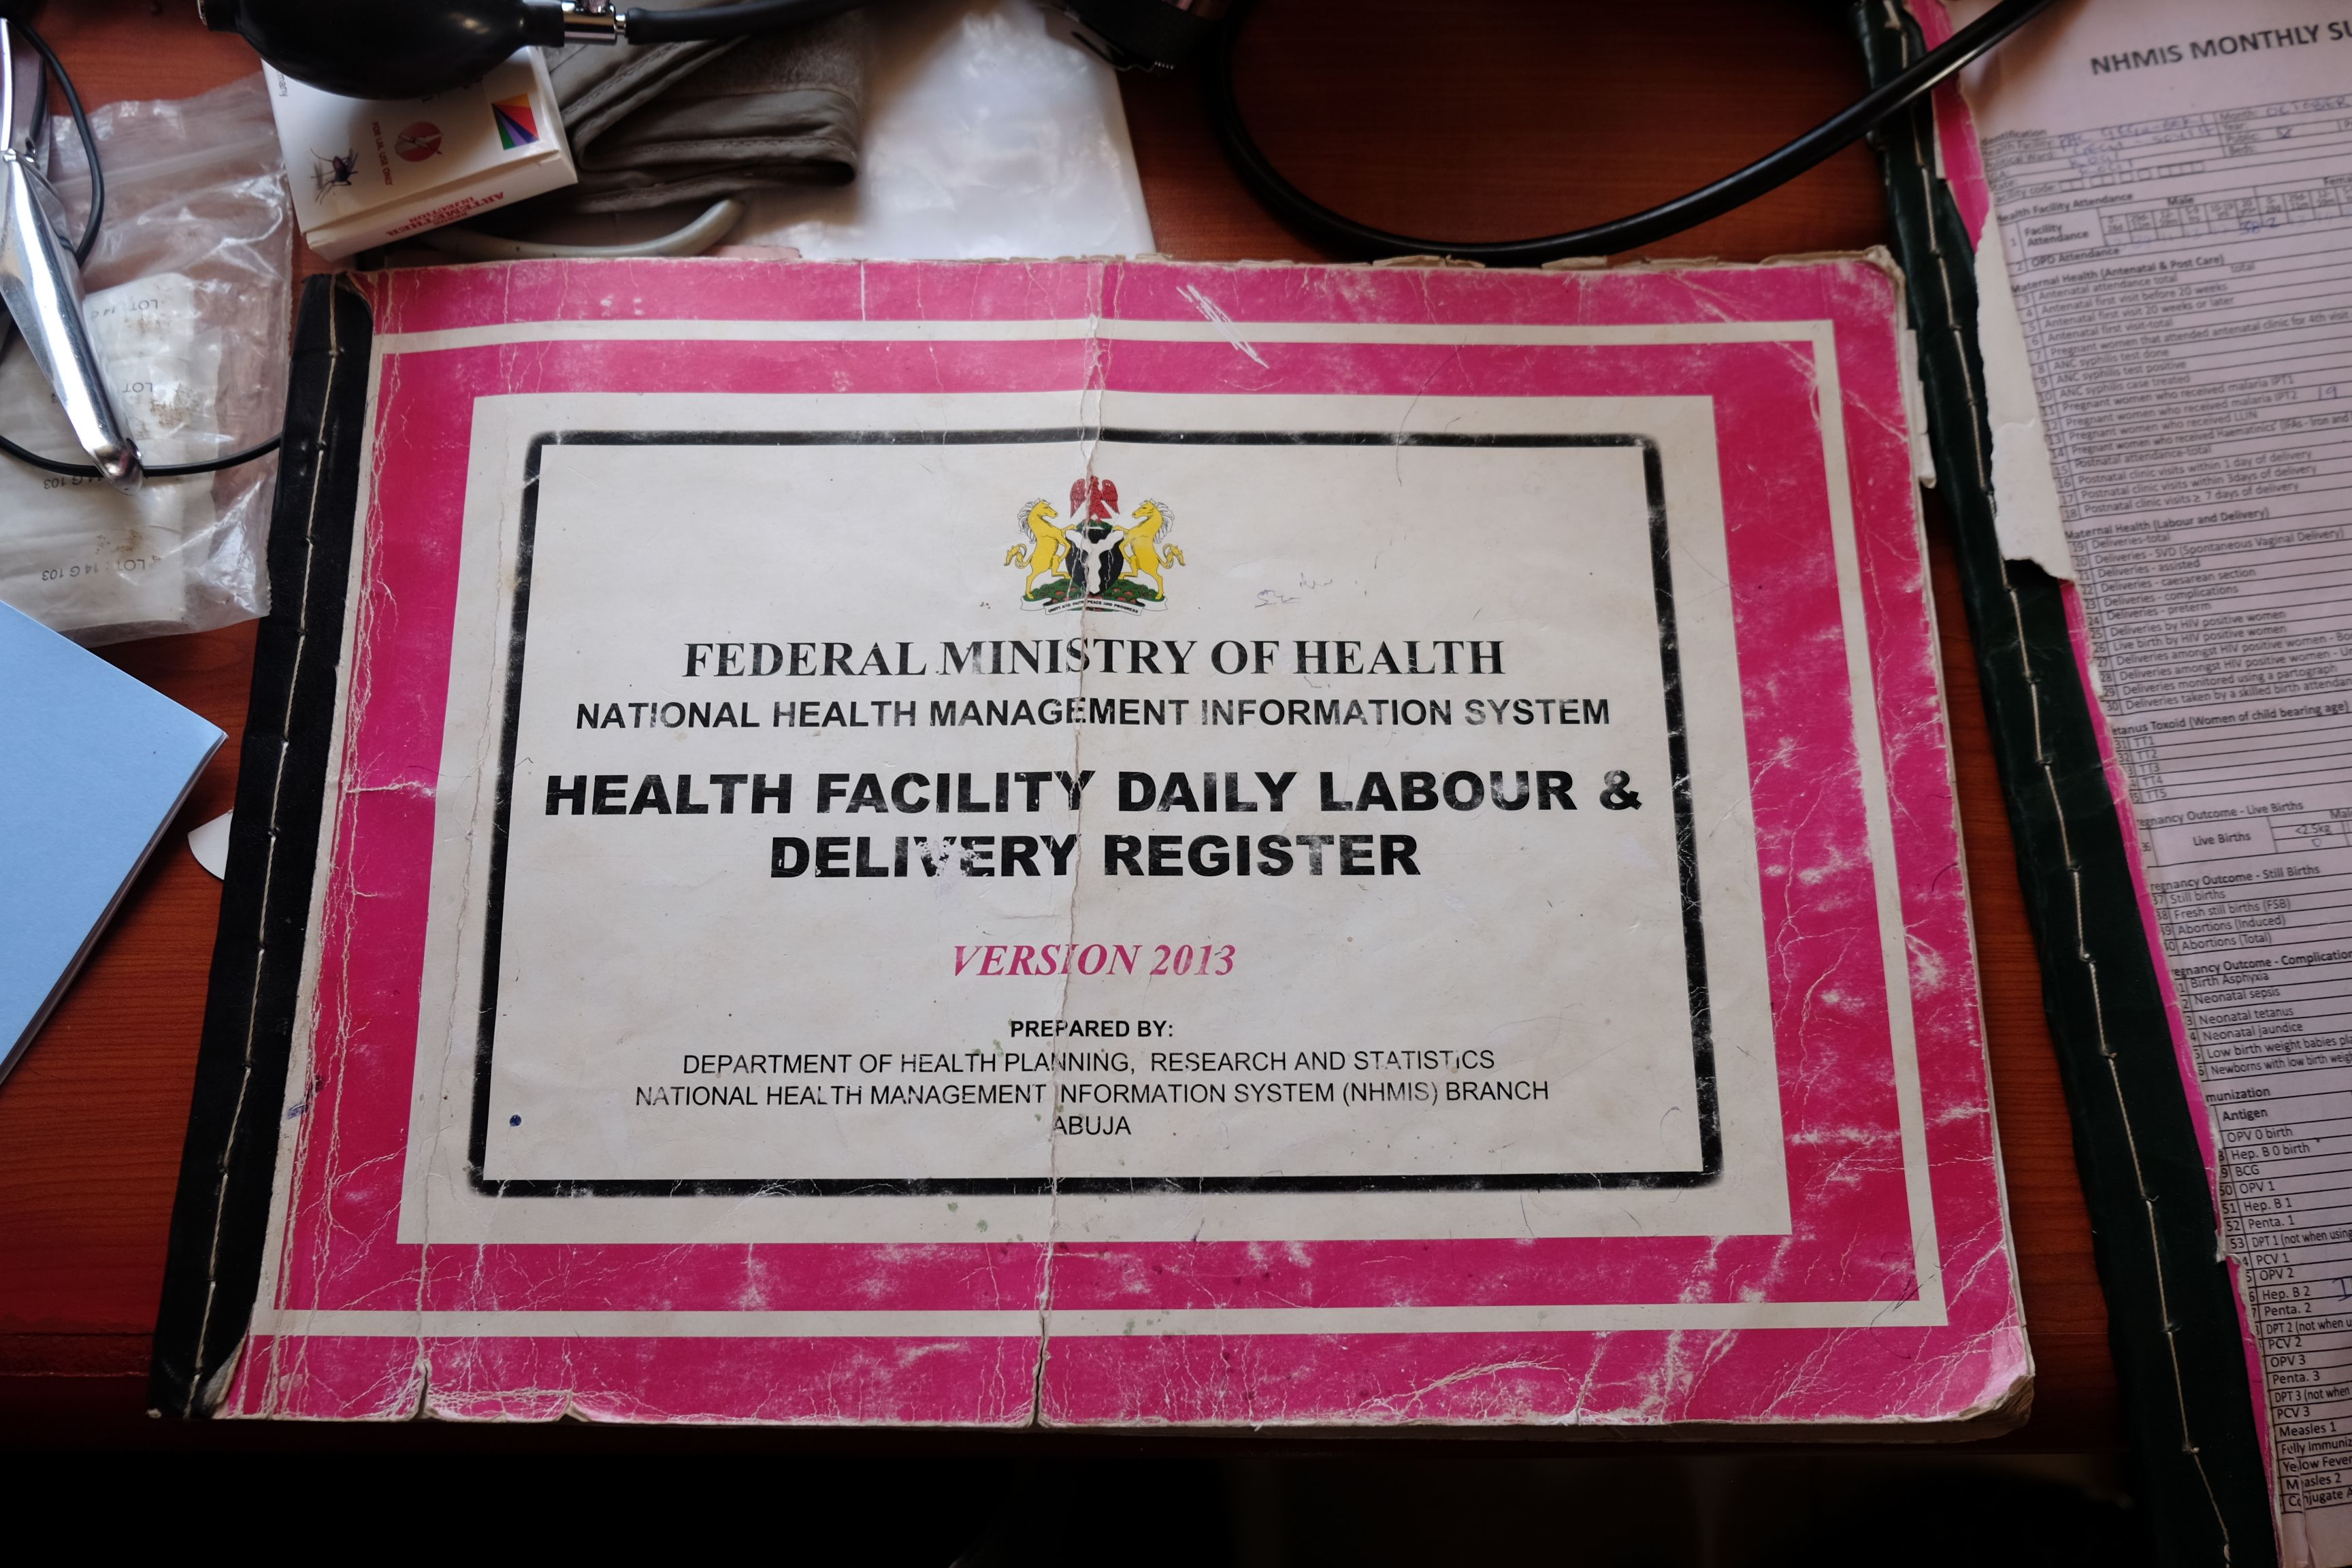 Nigeria's official Health Facility Daily Labour & Delivery Registry.  The current registry does not include a column for chlorhexidine use. Health care advocates are hoping that there will be a chlorhexidine column when the registry is next revised. Image by T.R. Goldman. Nigeria, 2017.